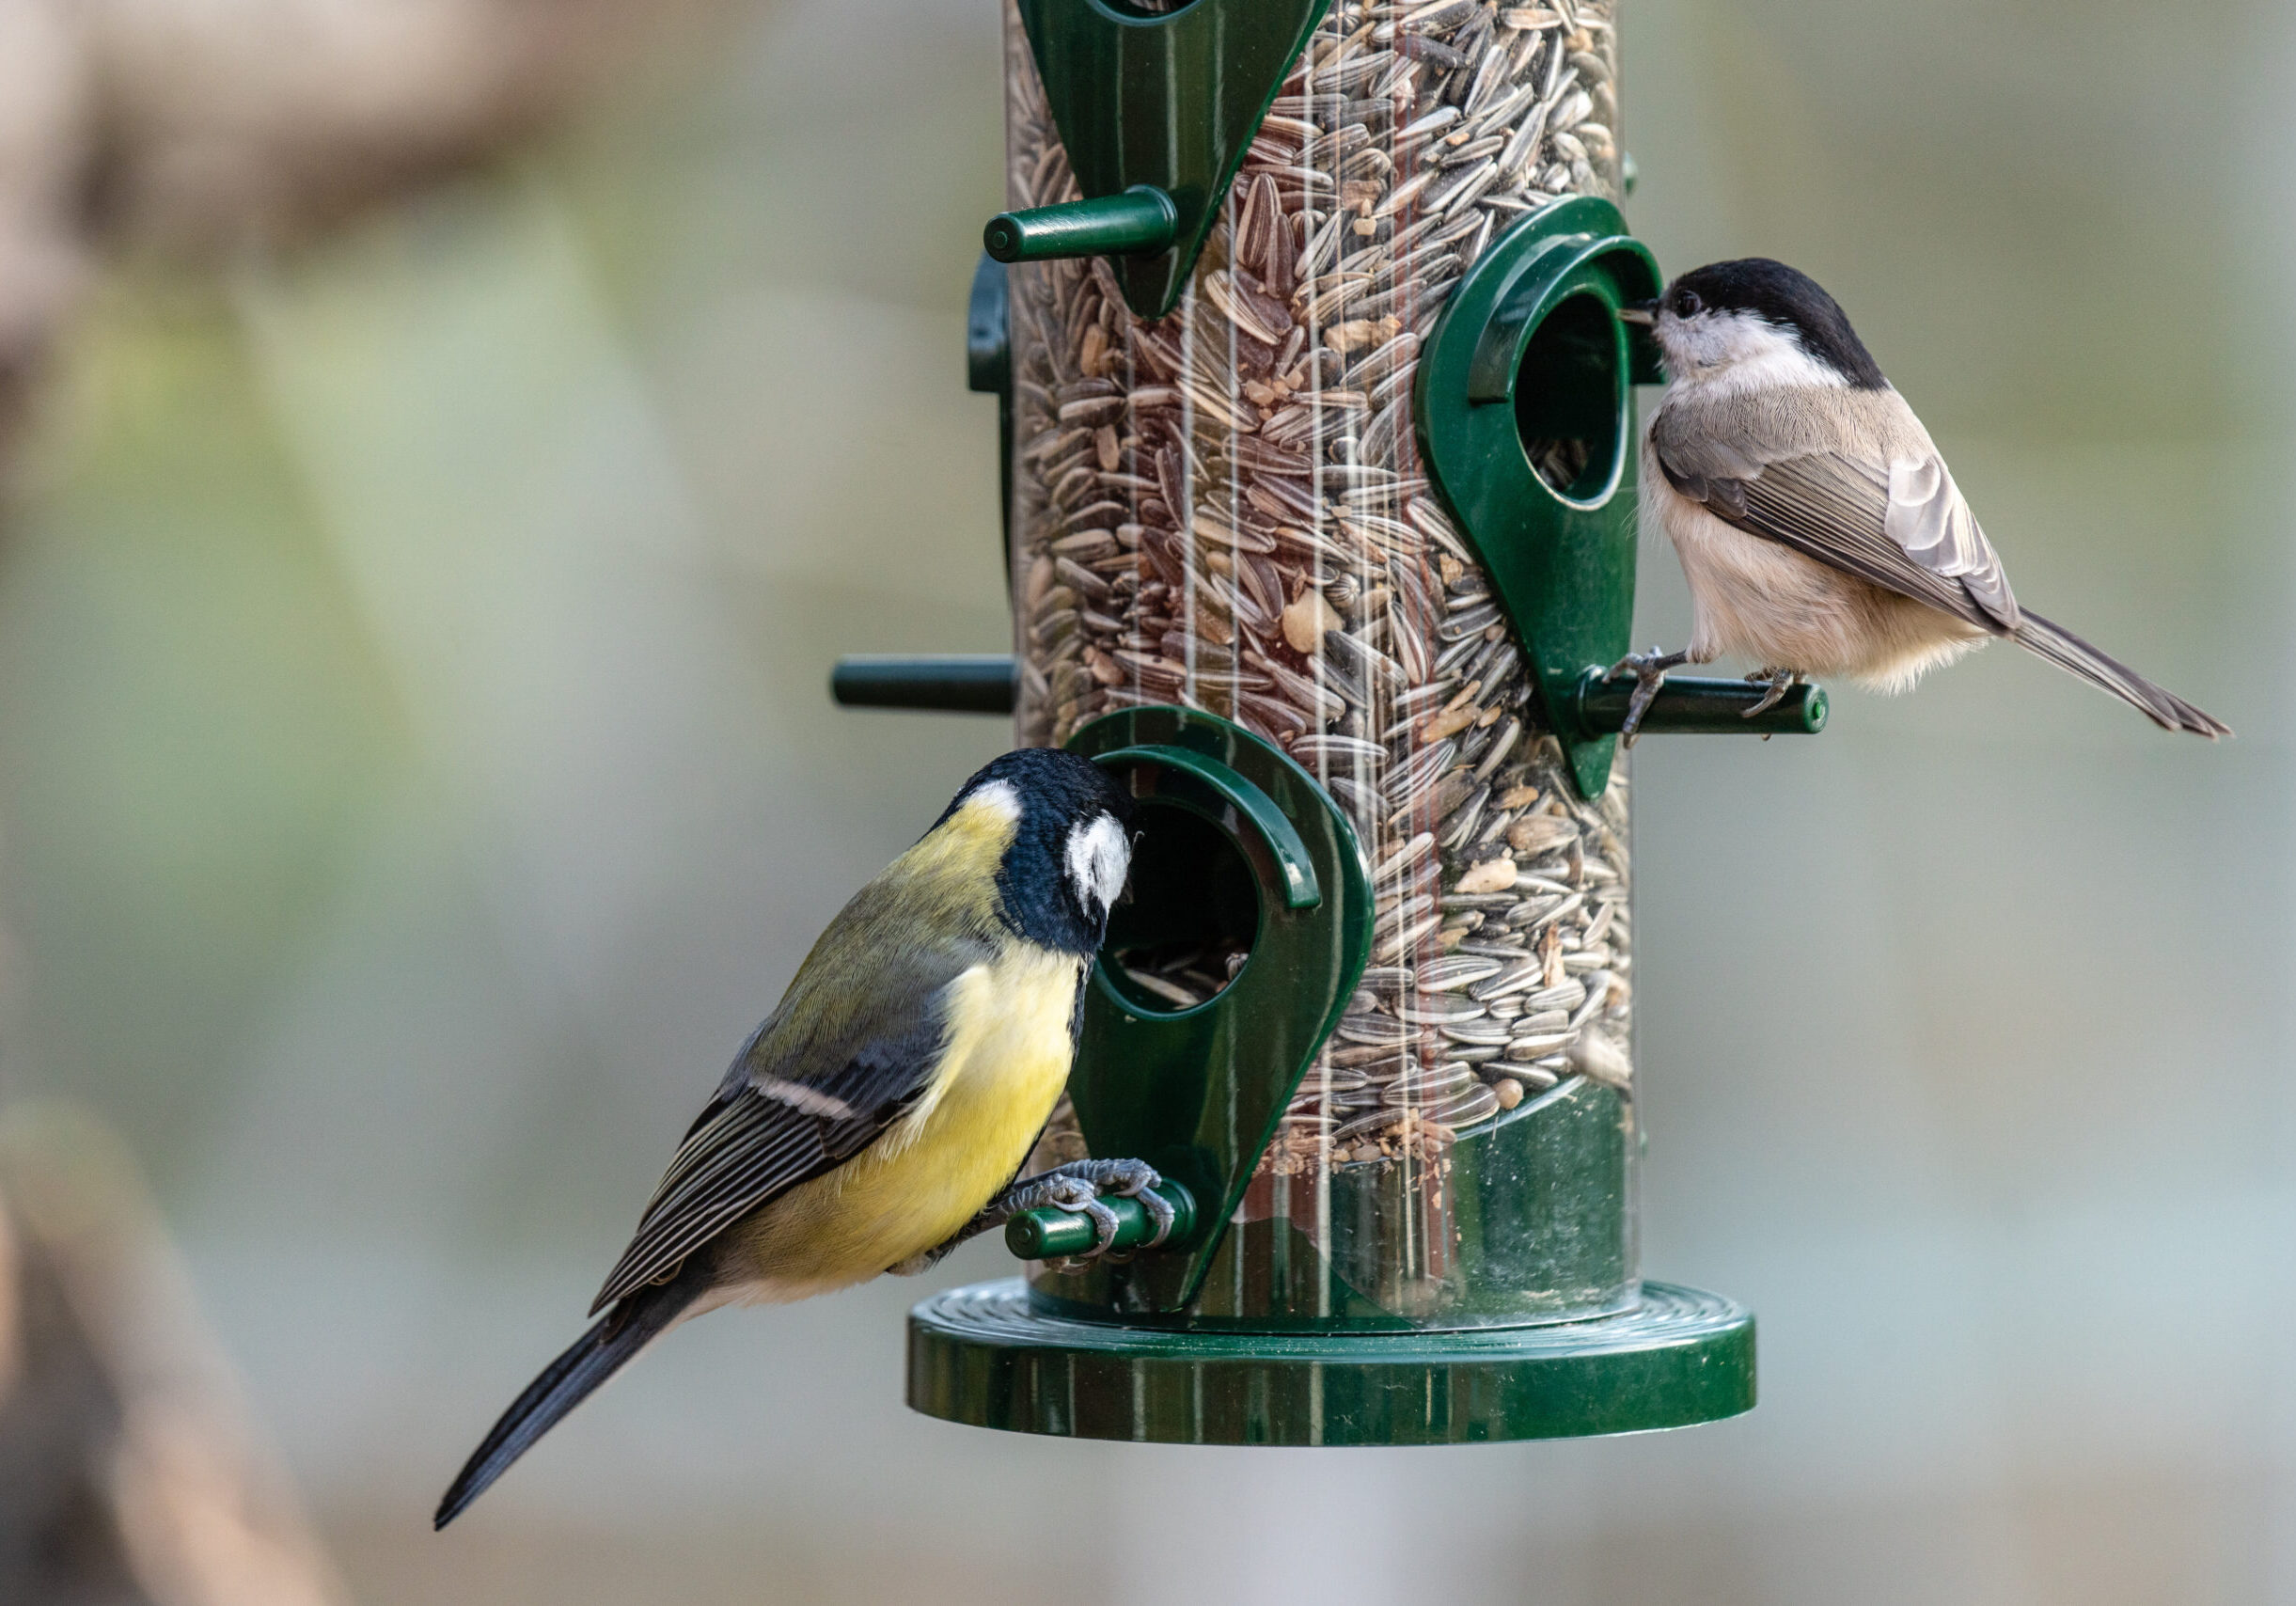 Small tit birds eating sunflower seeds from a feeder or dispencer in autumn.